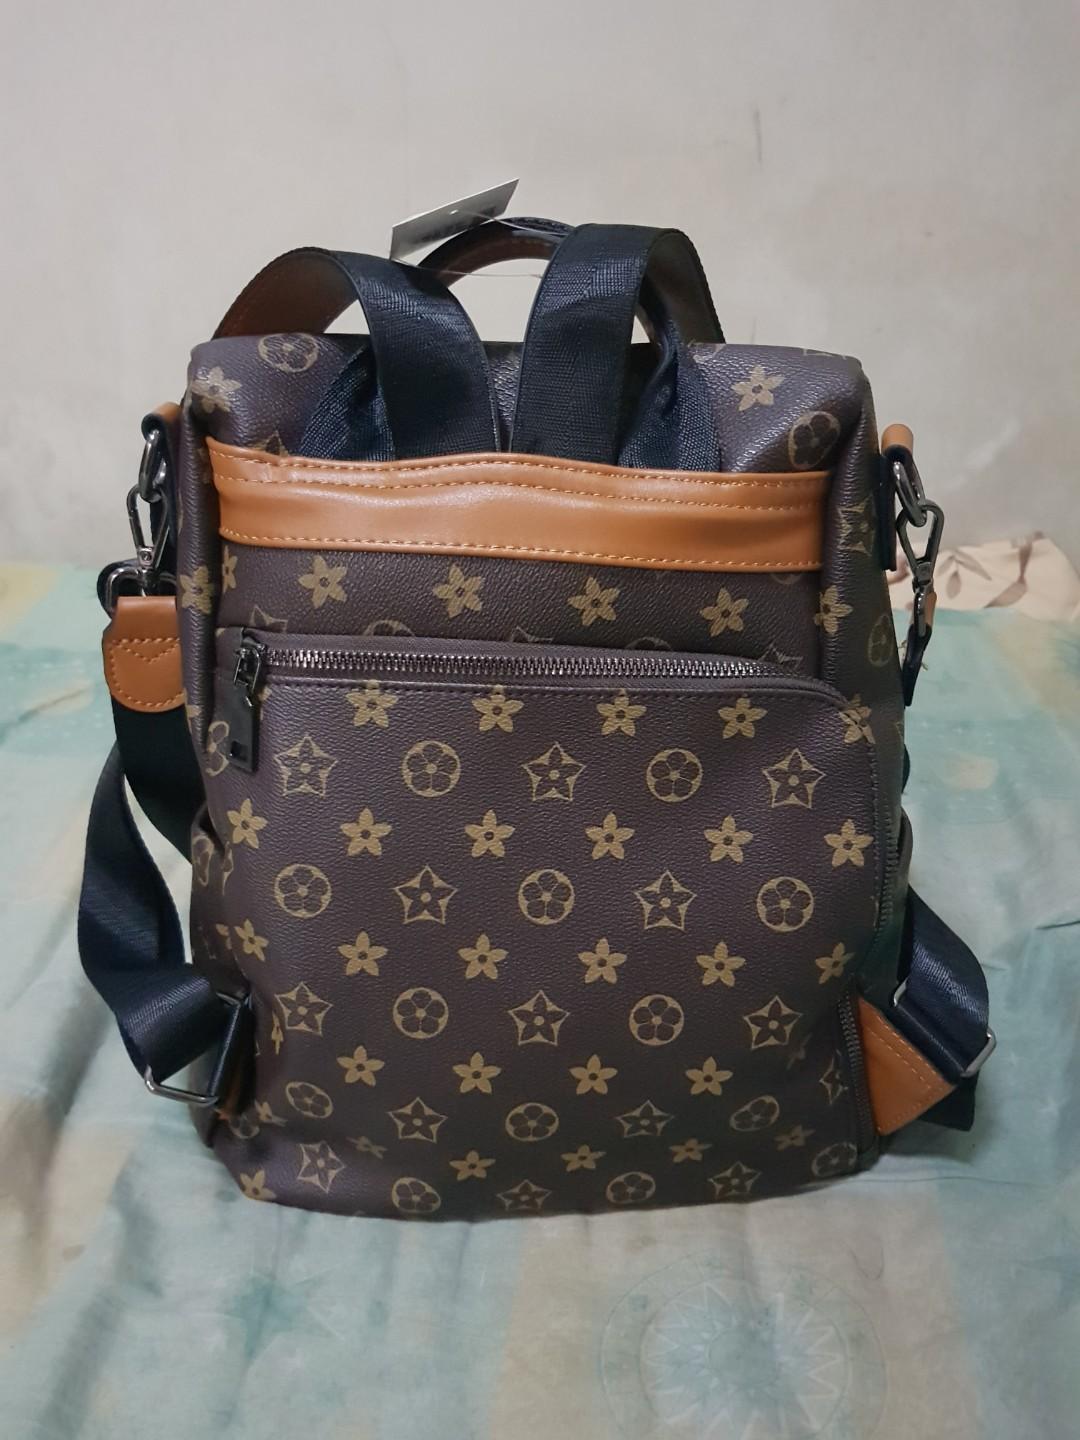 Inspired LV two way bag.